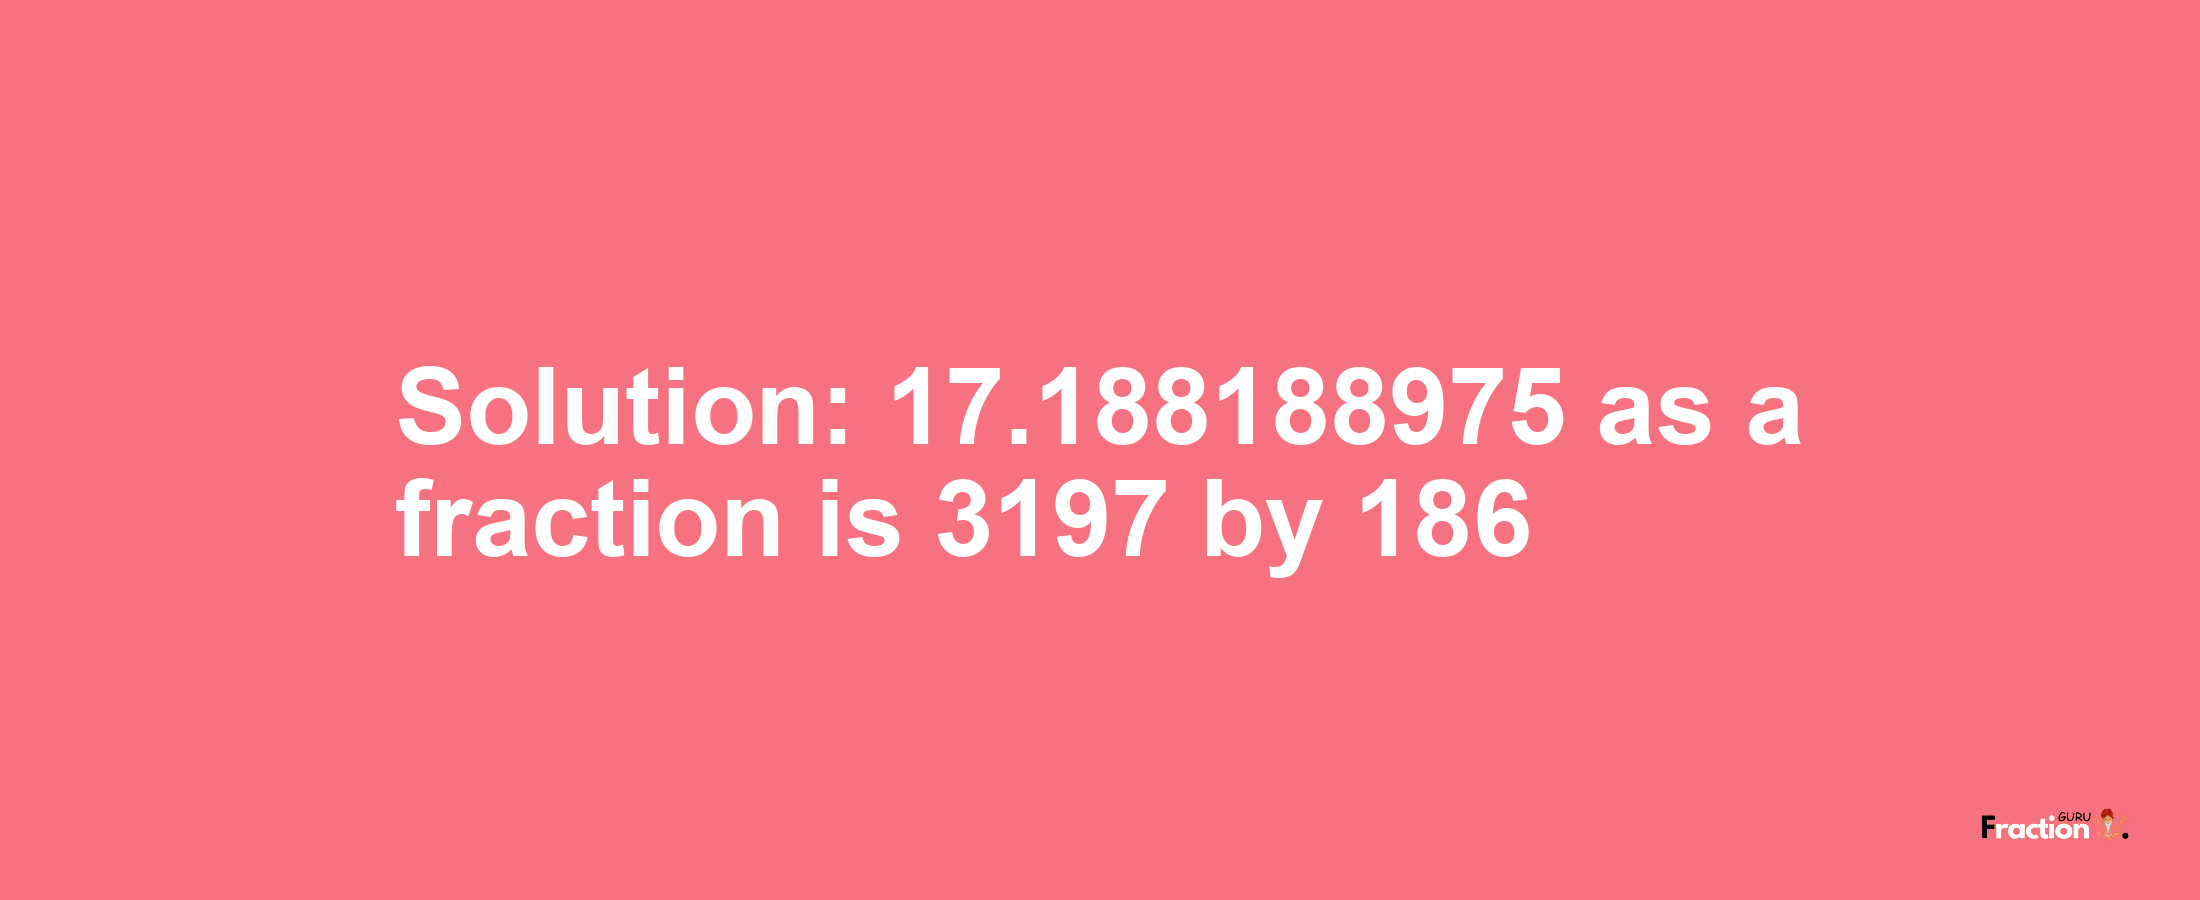 Solution:17.188188975 as a fraction is 3197/186